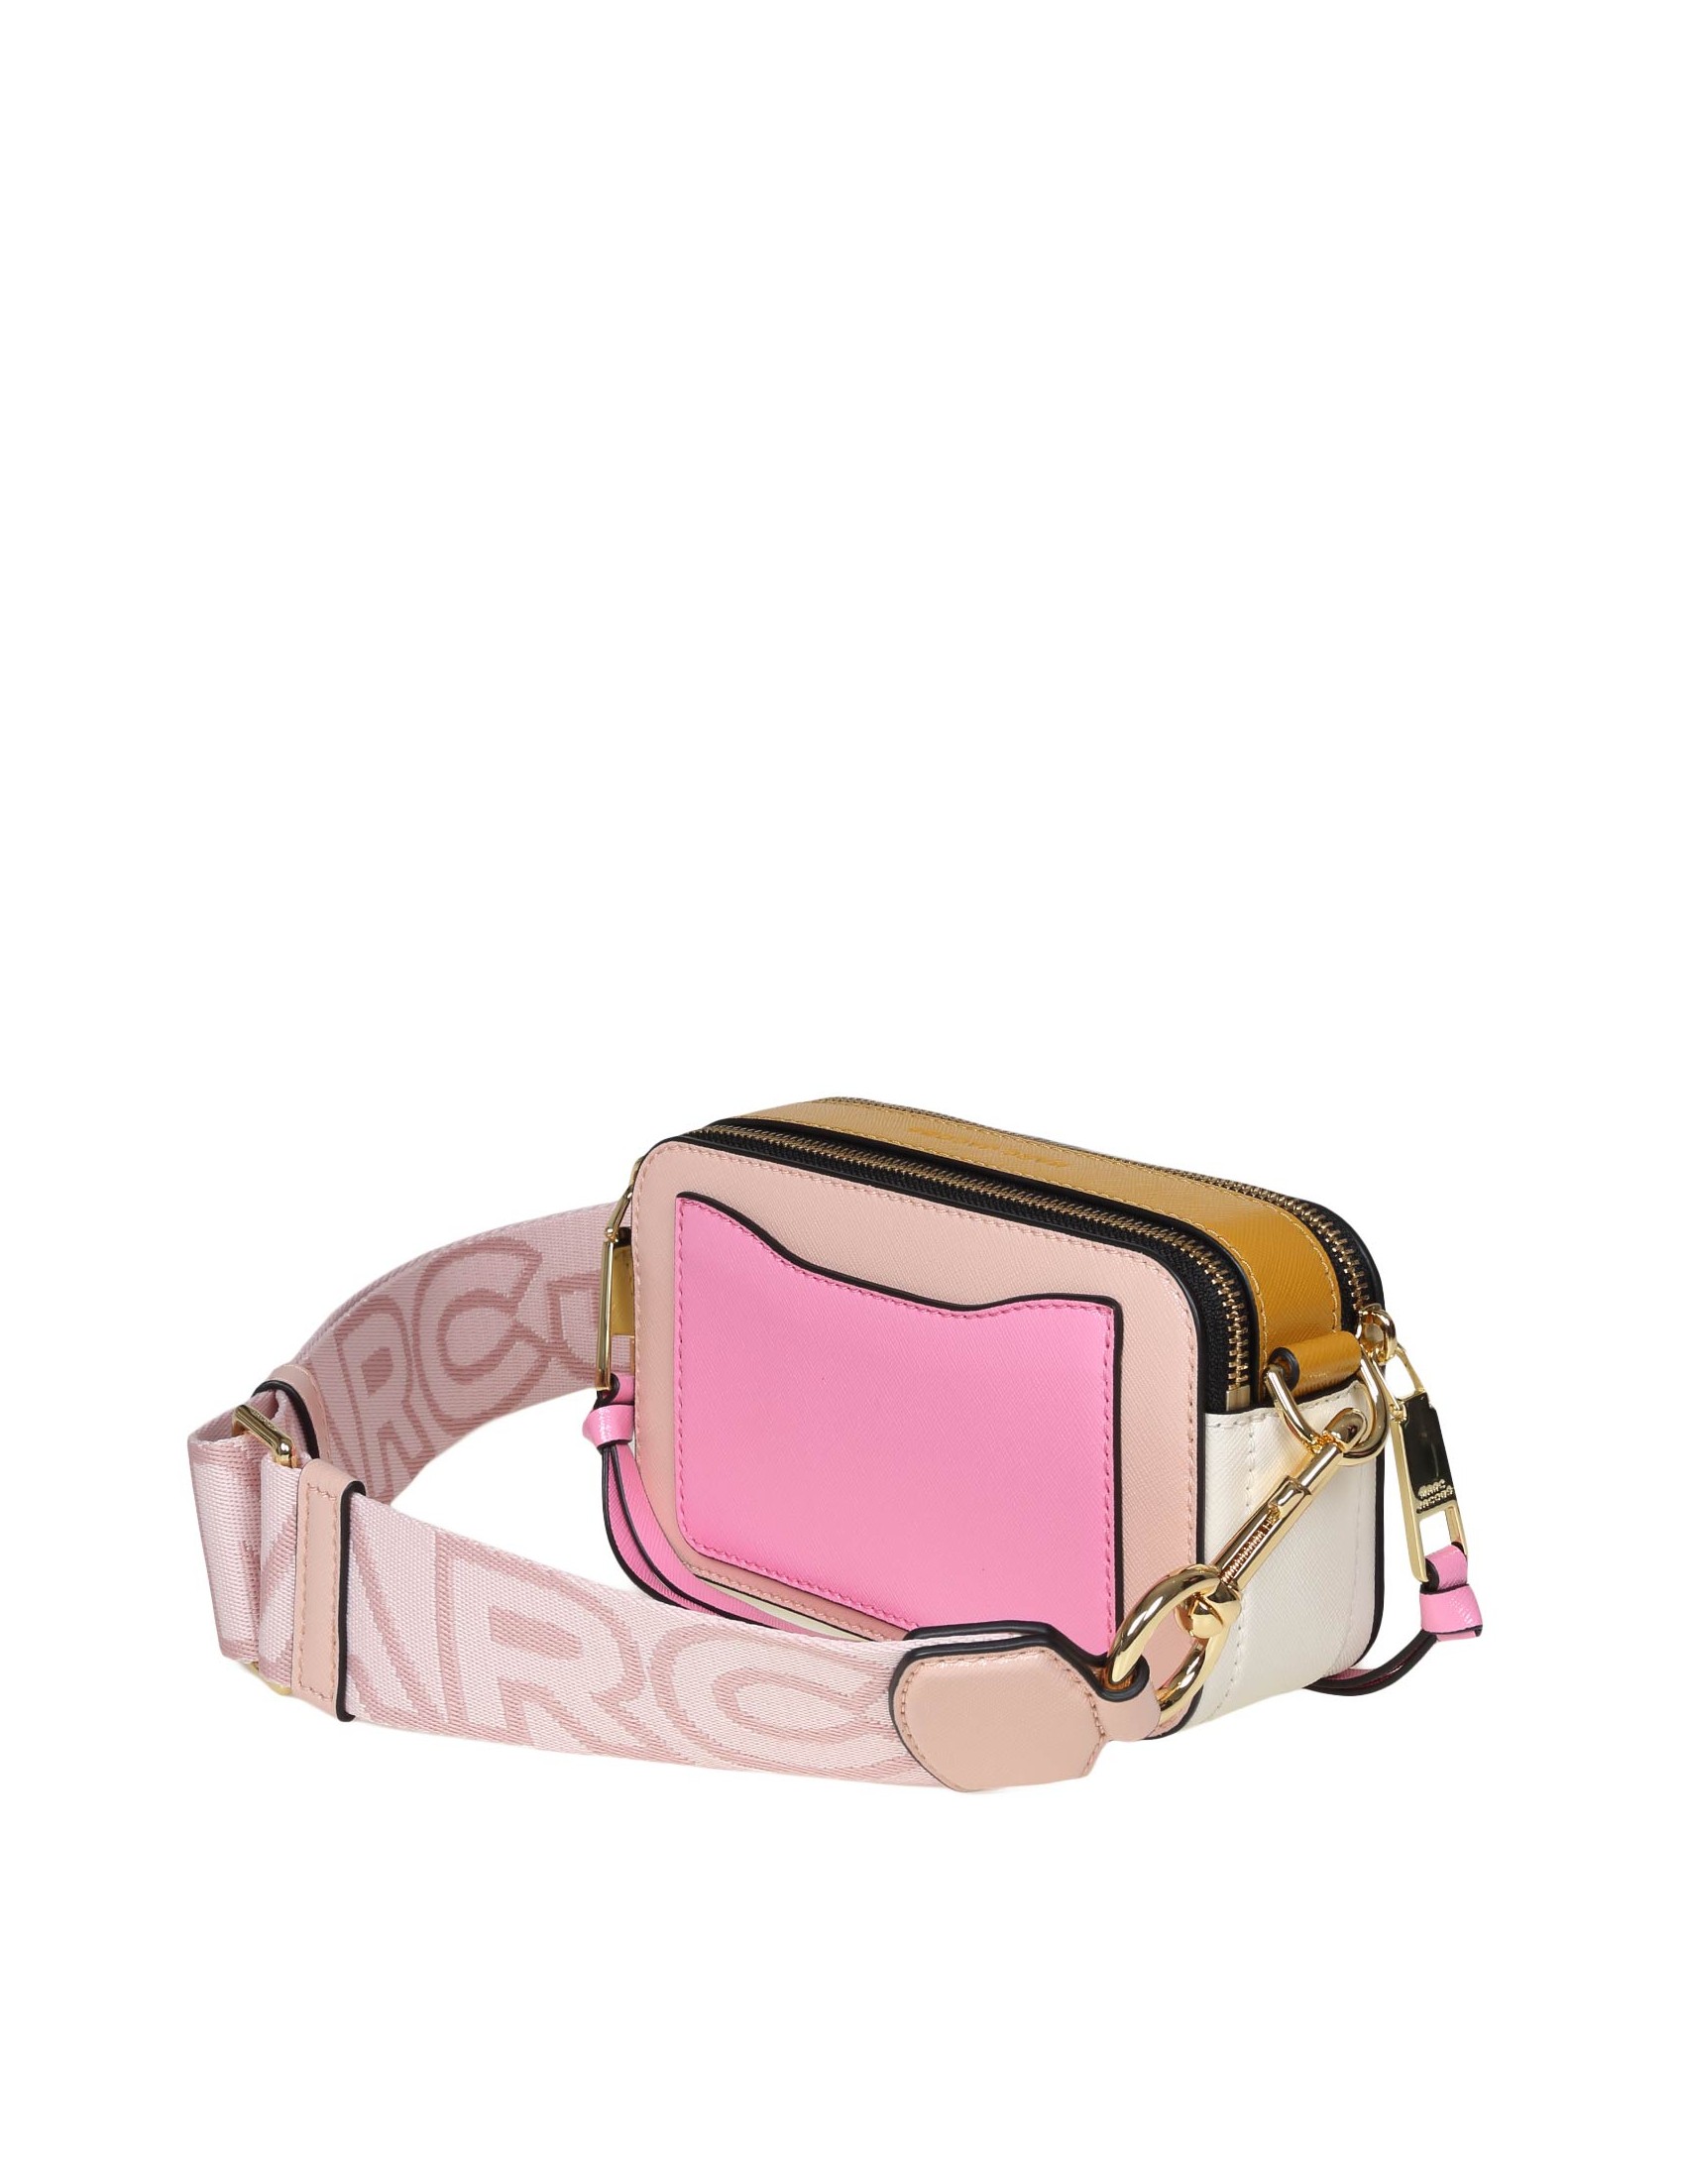 MARC JACOBS SNAPSHOT BAG IN PINK LEATHER